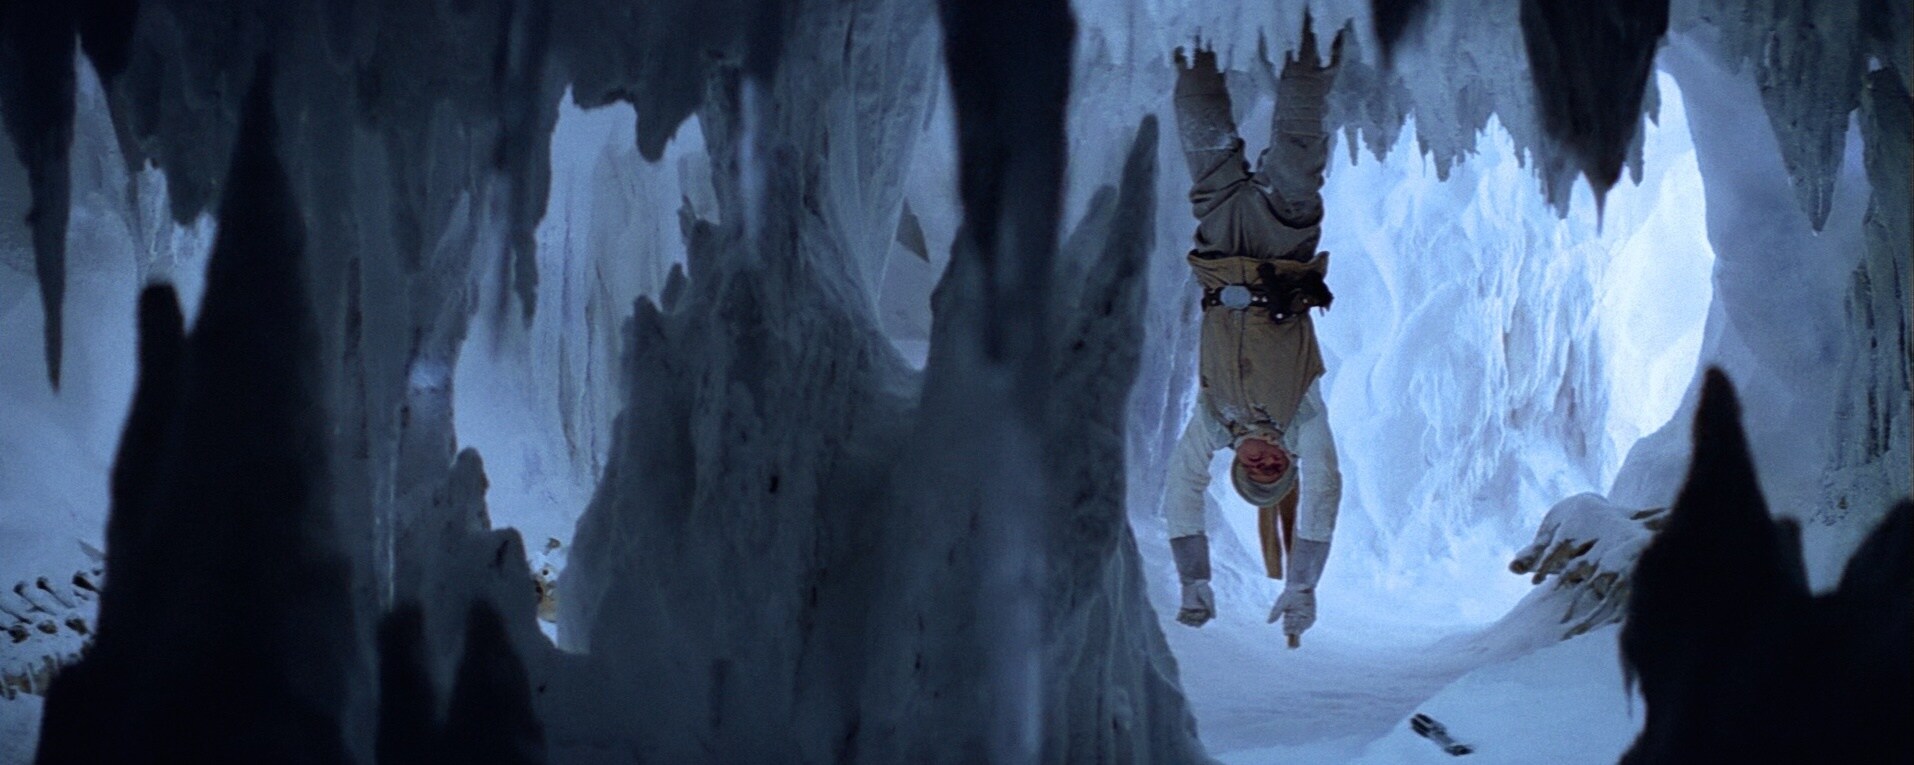 TIL that the scene of Luke attacked my a Wampa on Hoth was added